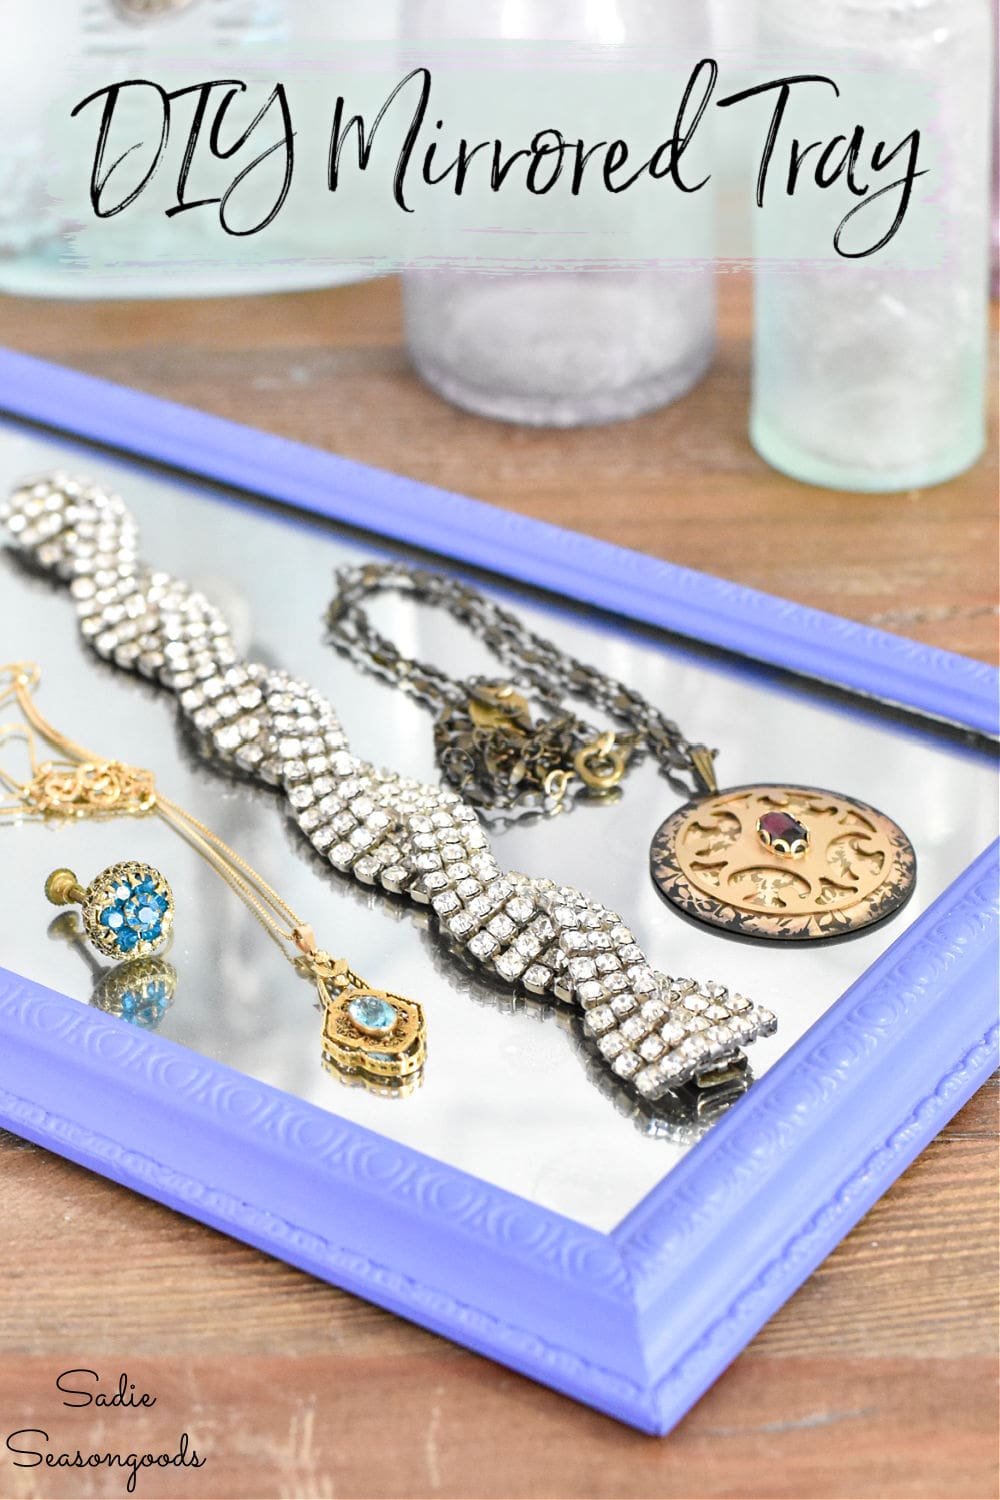 mirrored tray for jewelry